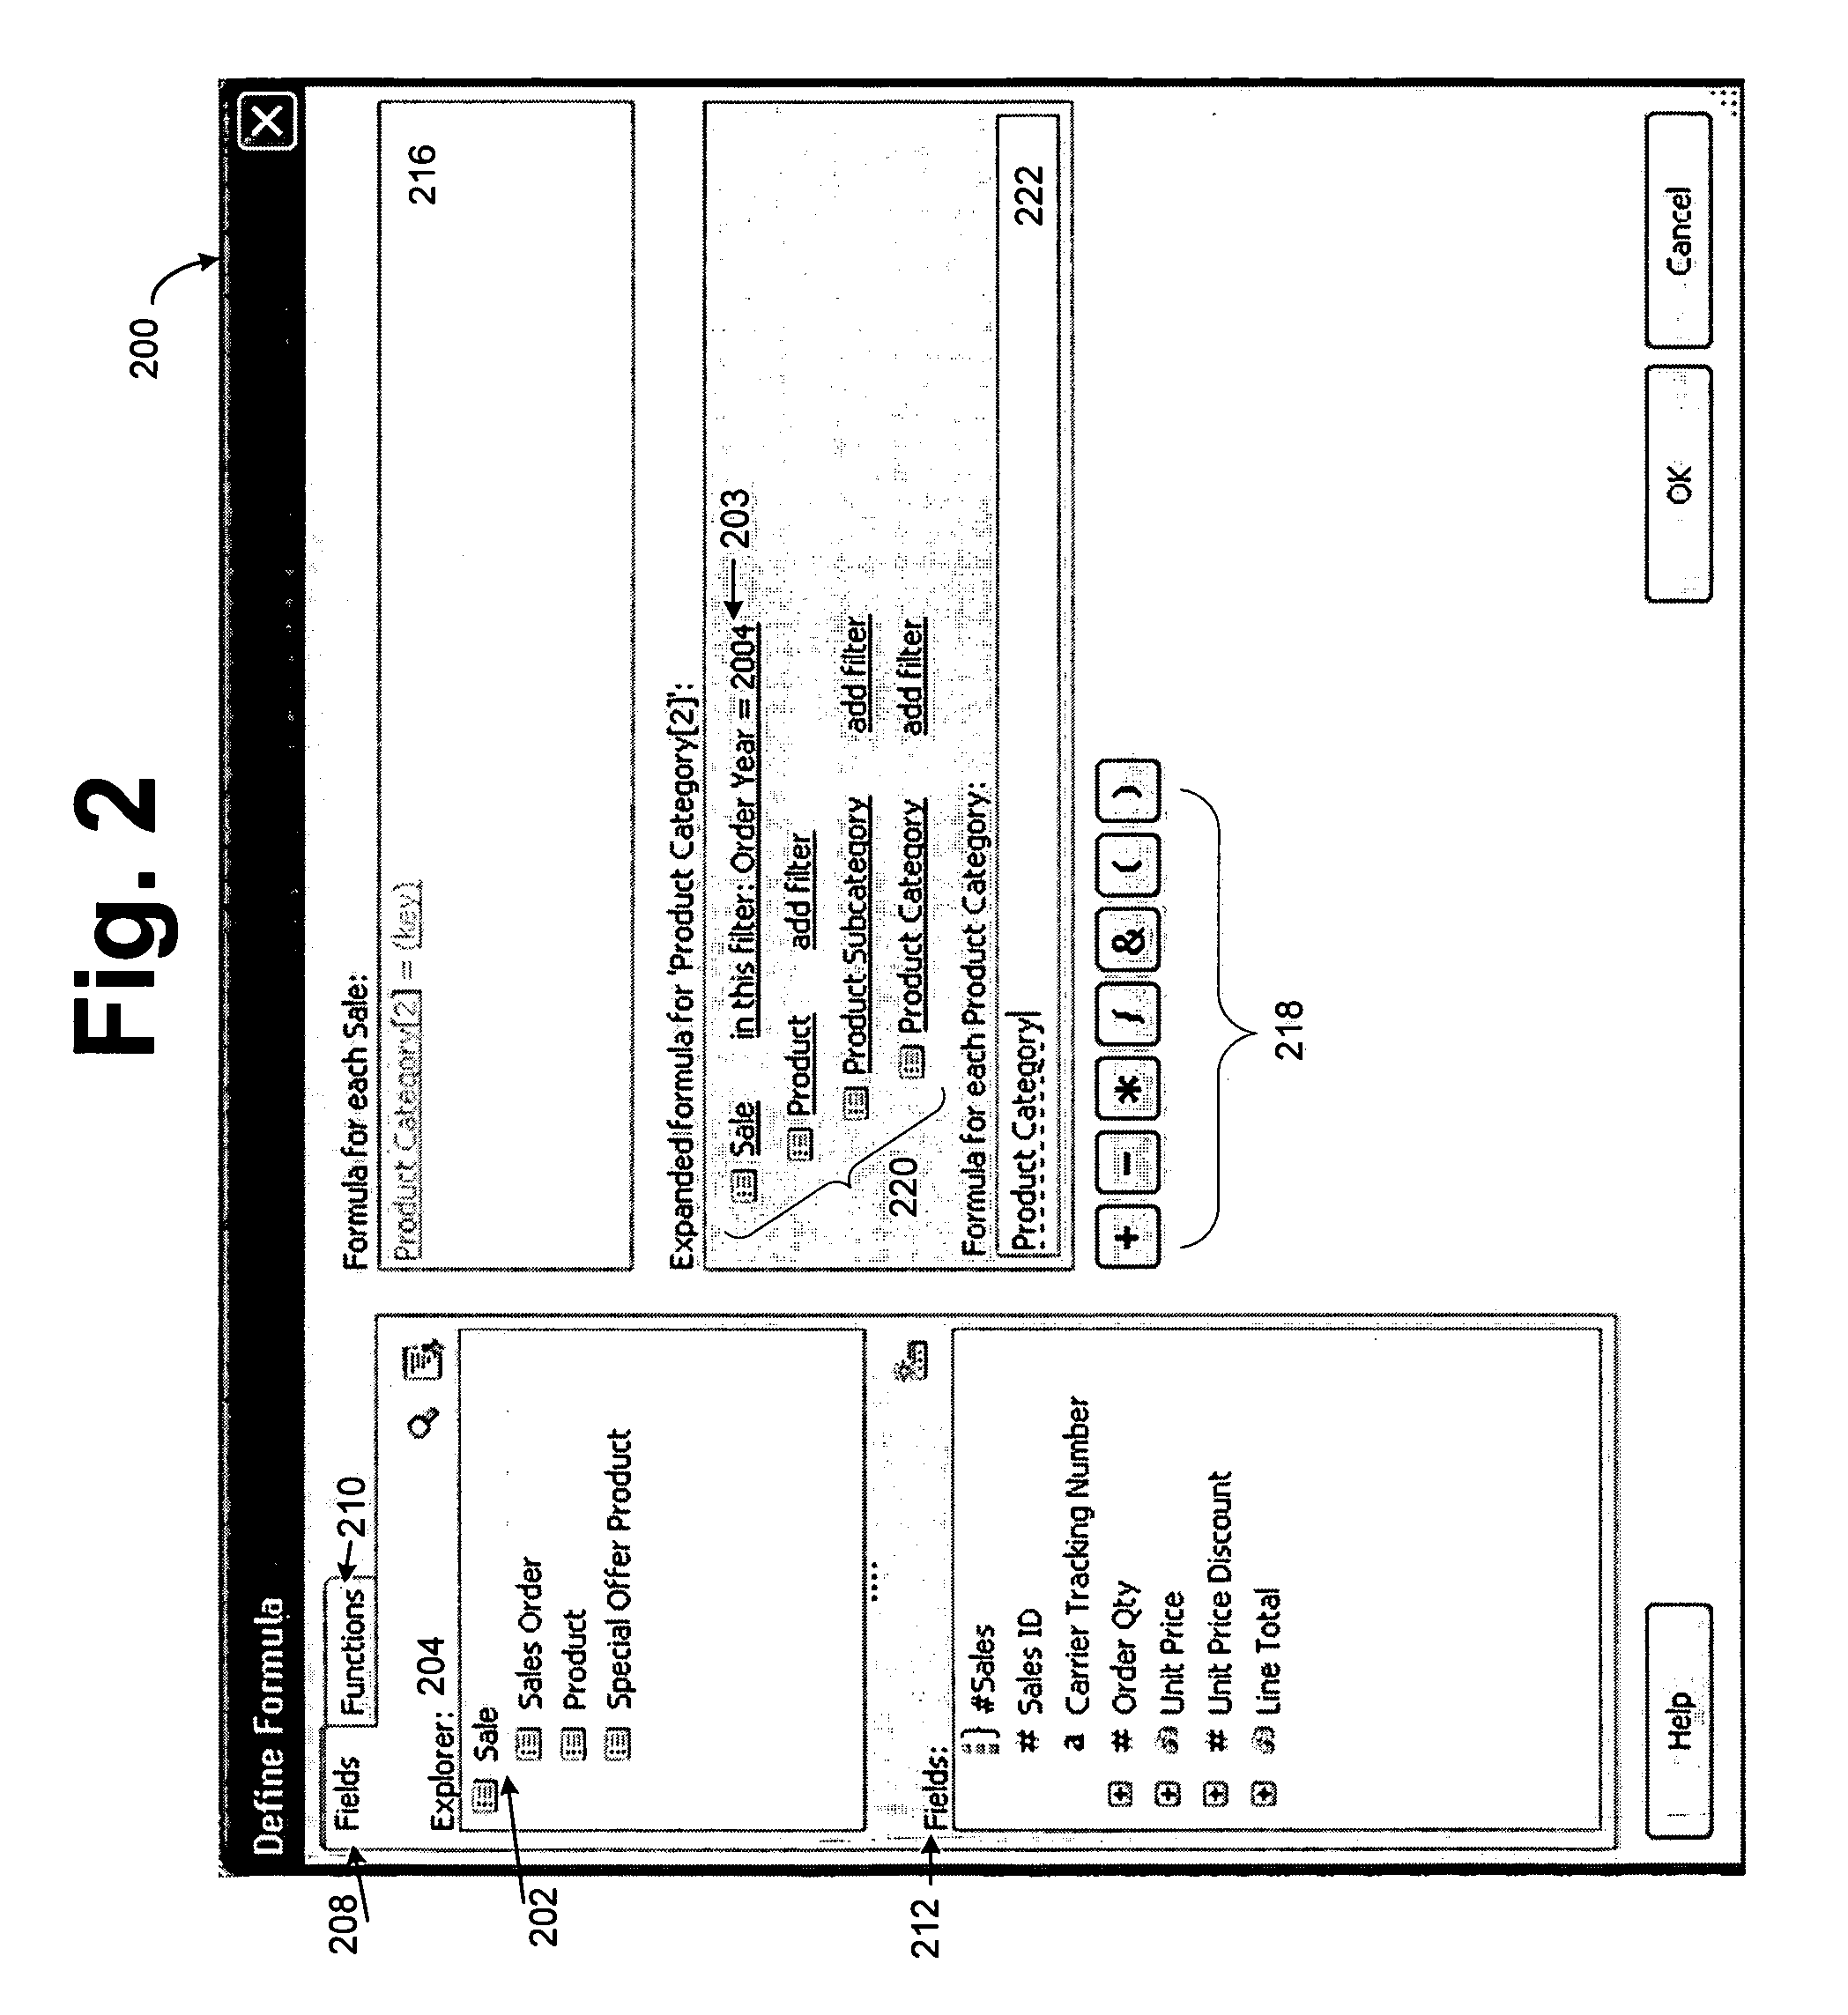 Method for building powerful calculations of an entity relationship model